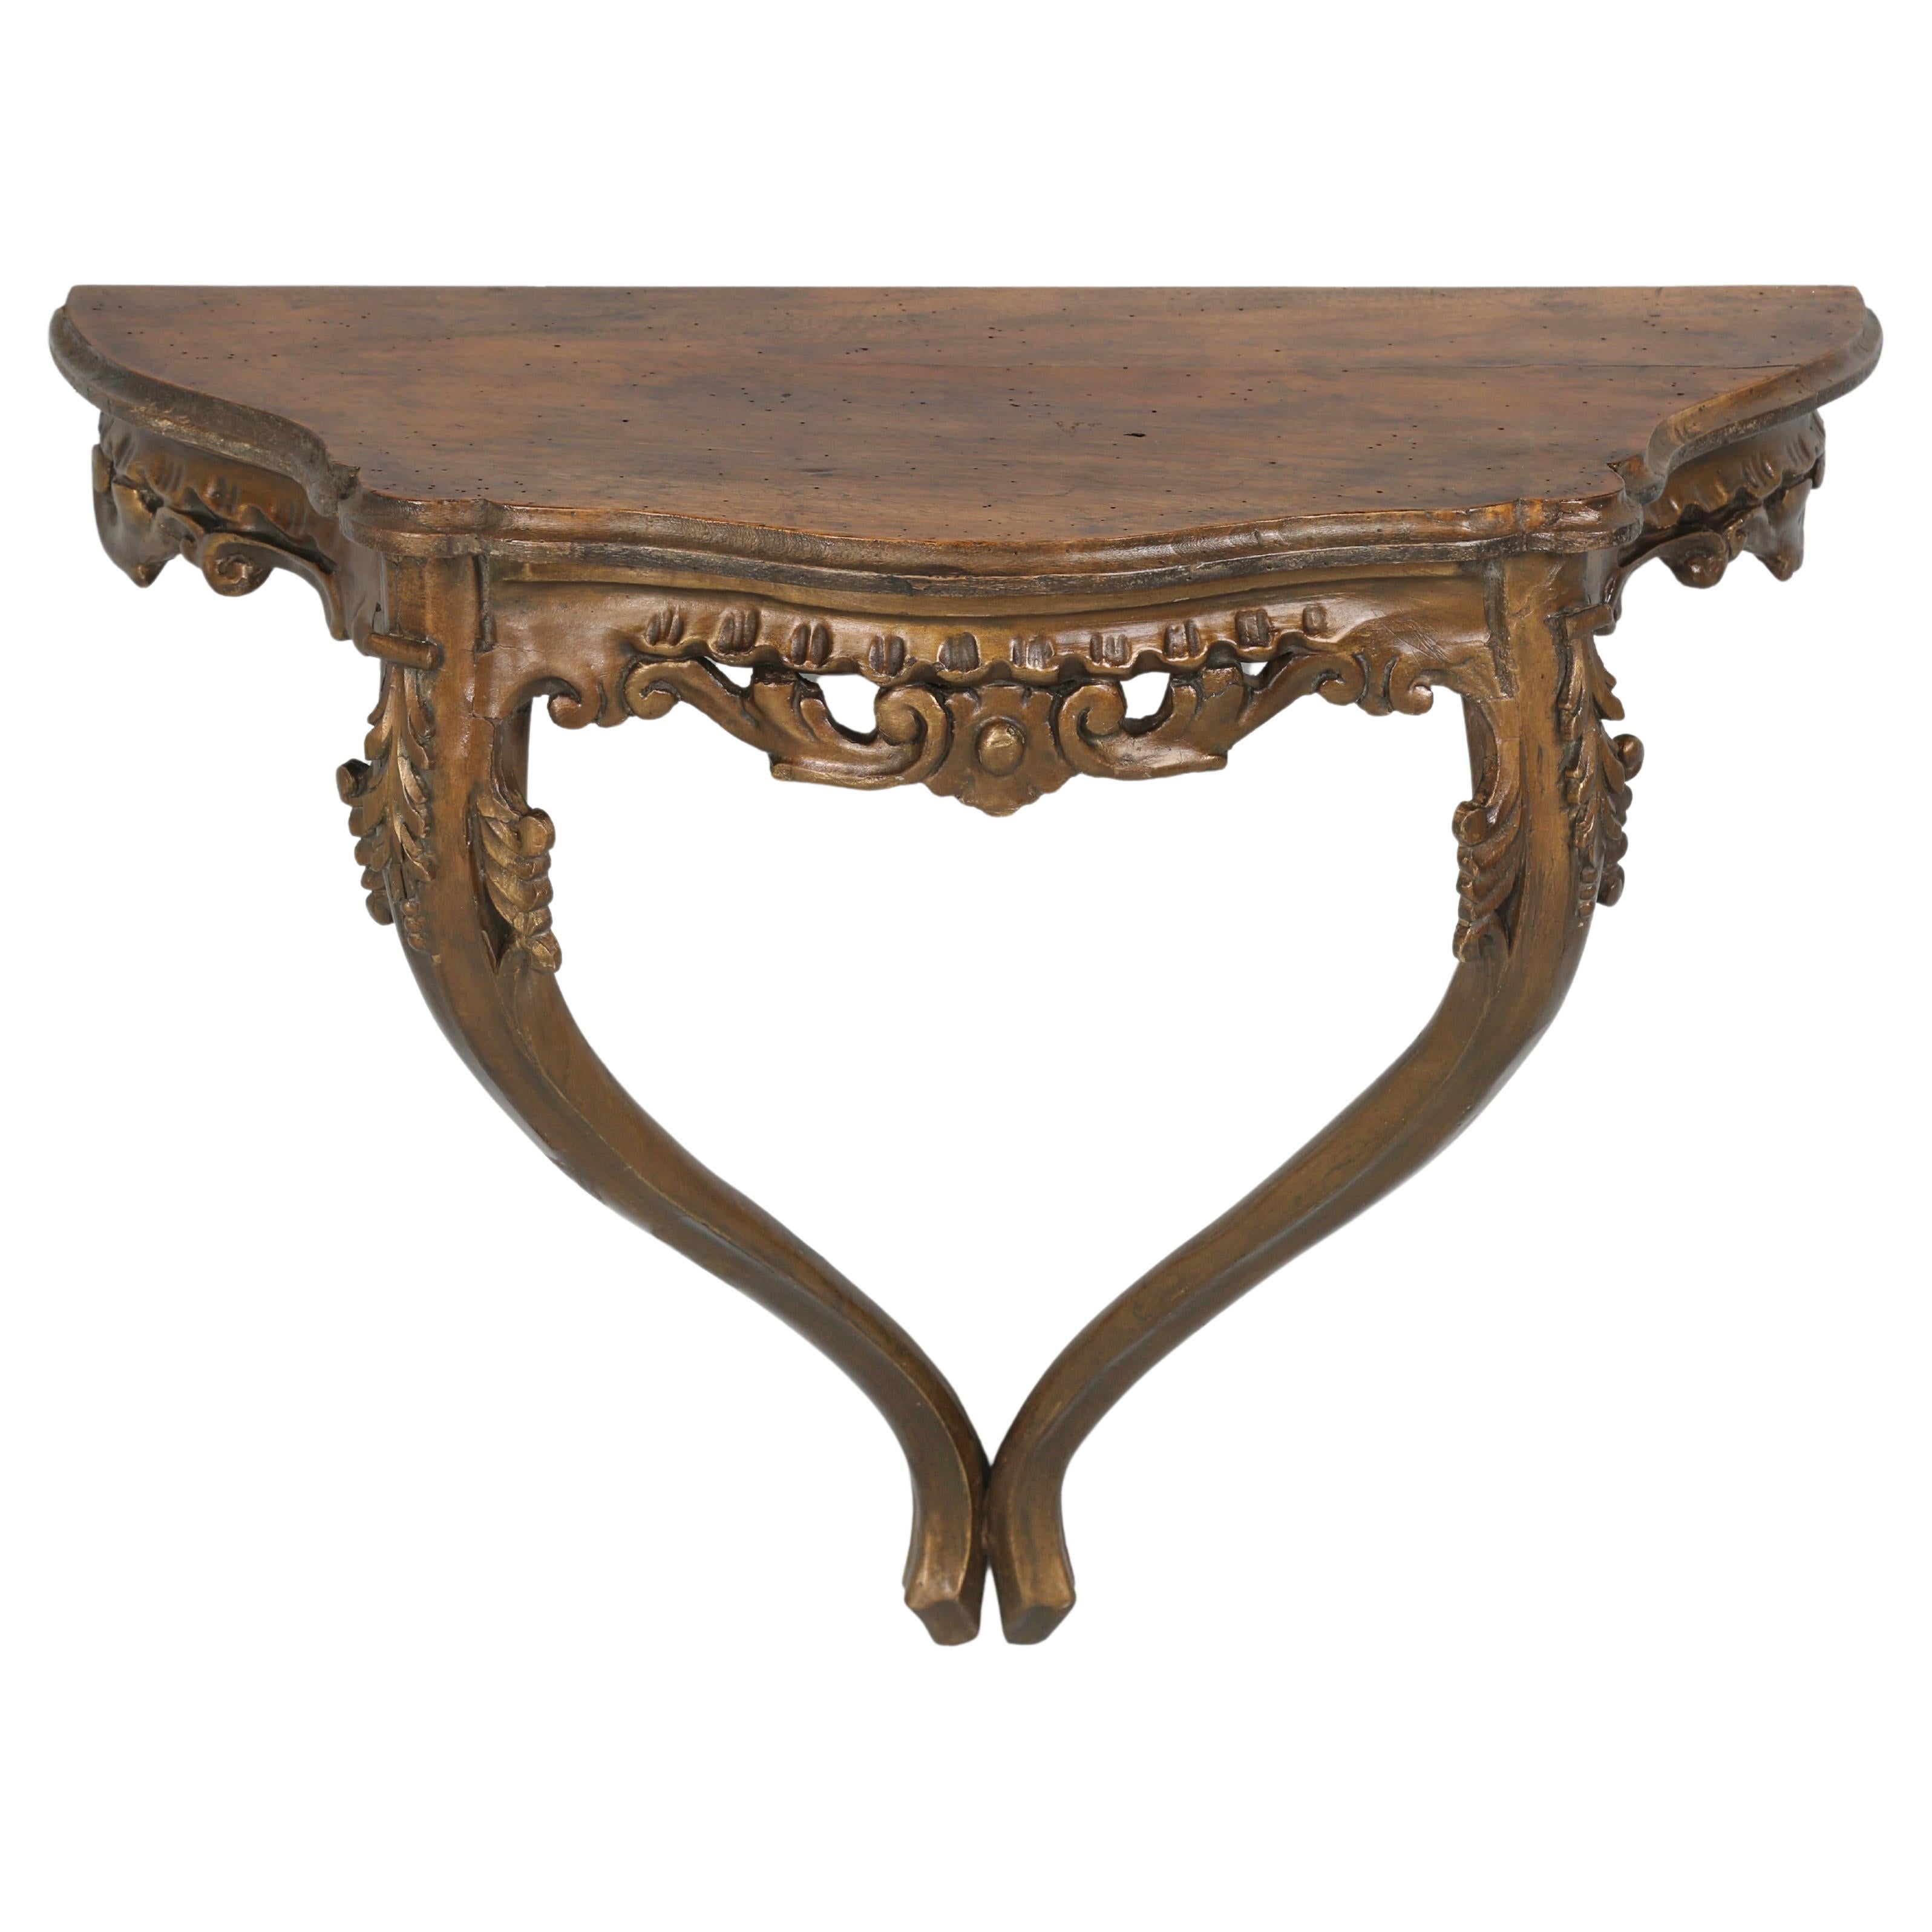 Antique French Hand-Carved Wall-Mounted Console Table c1900 Very Diminutive For Sale